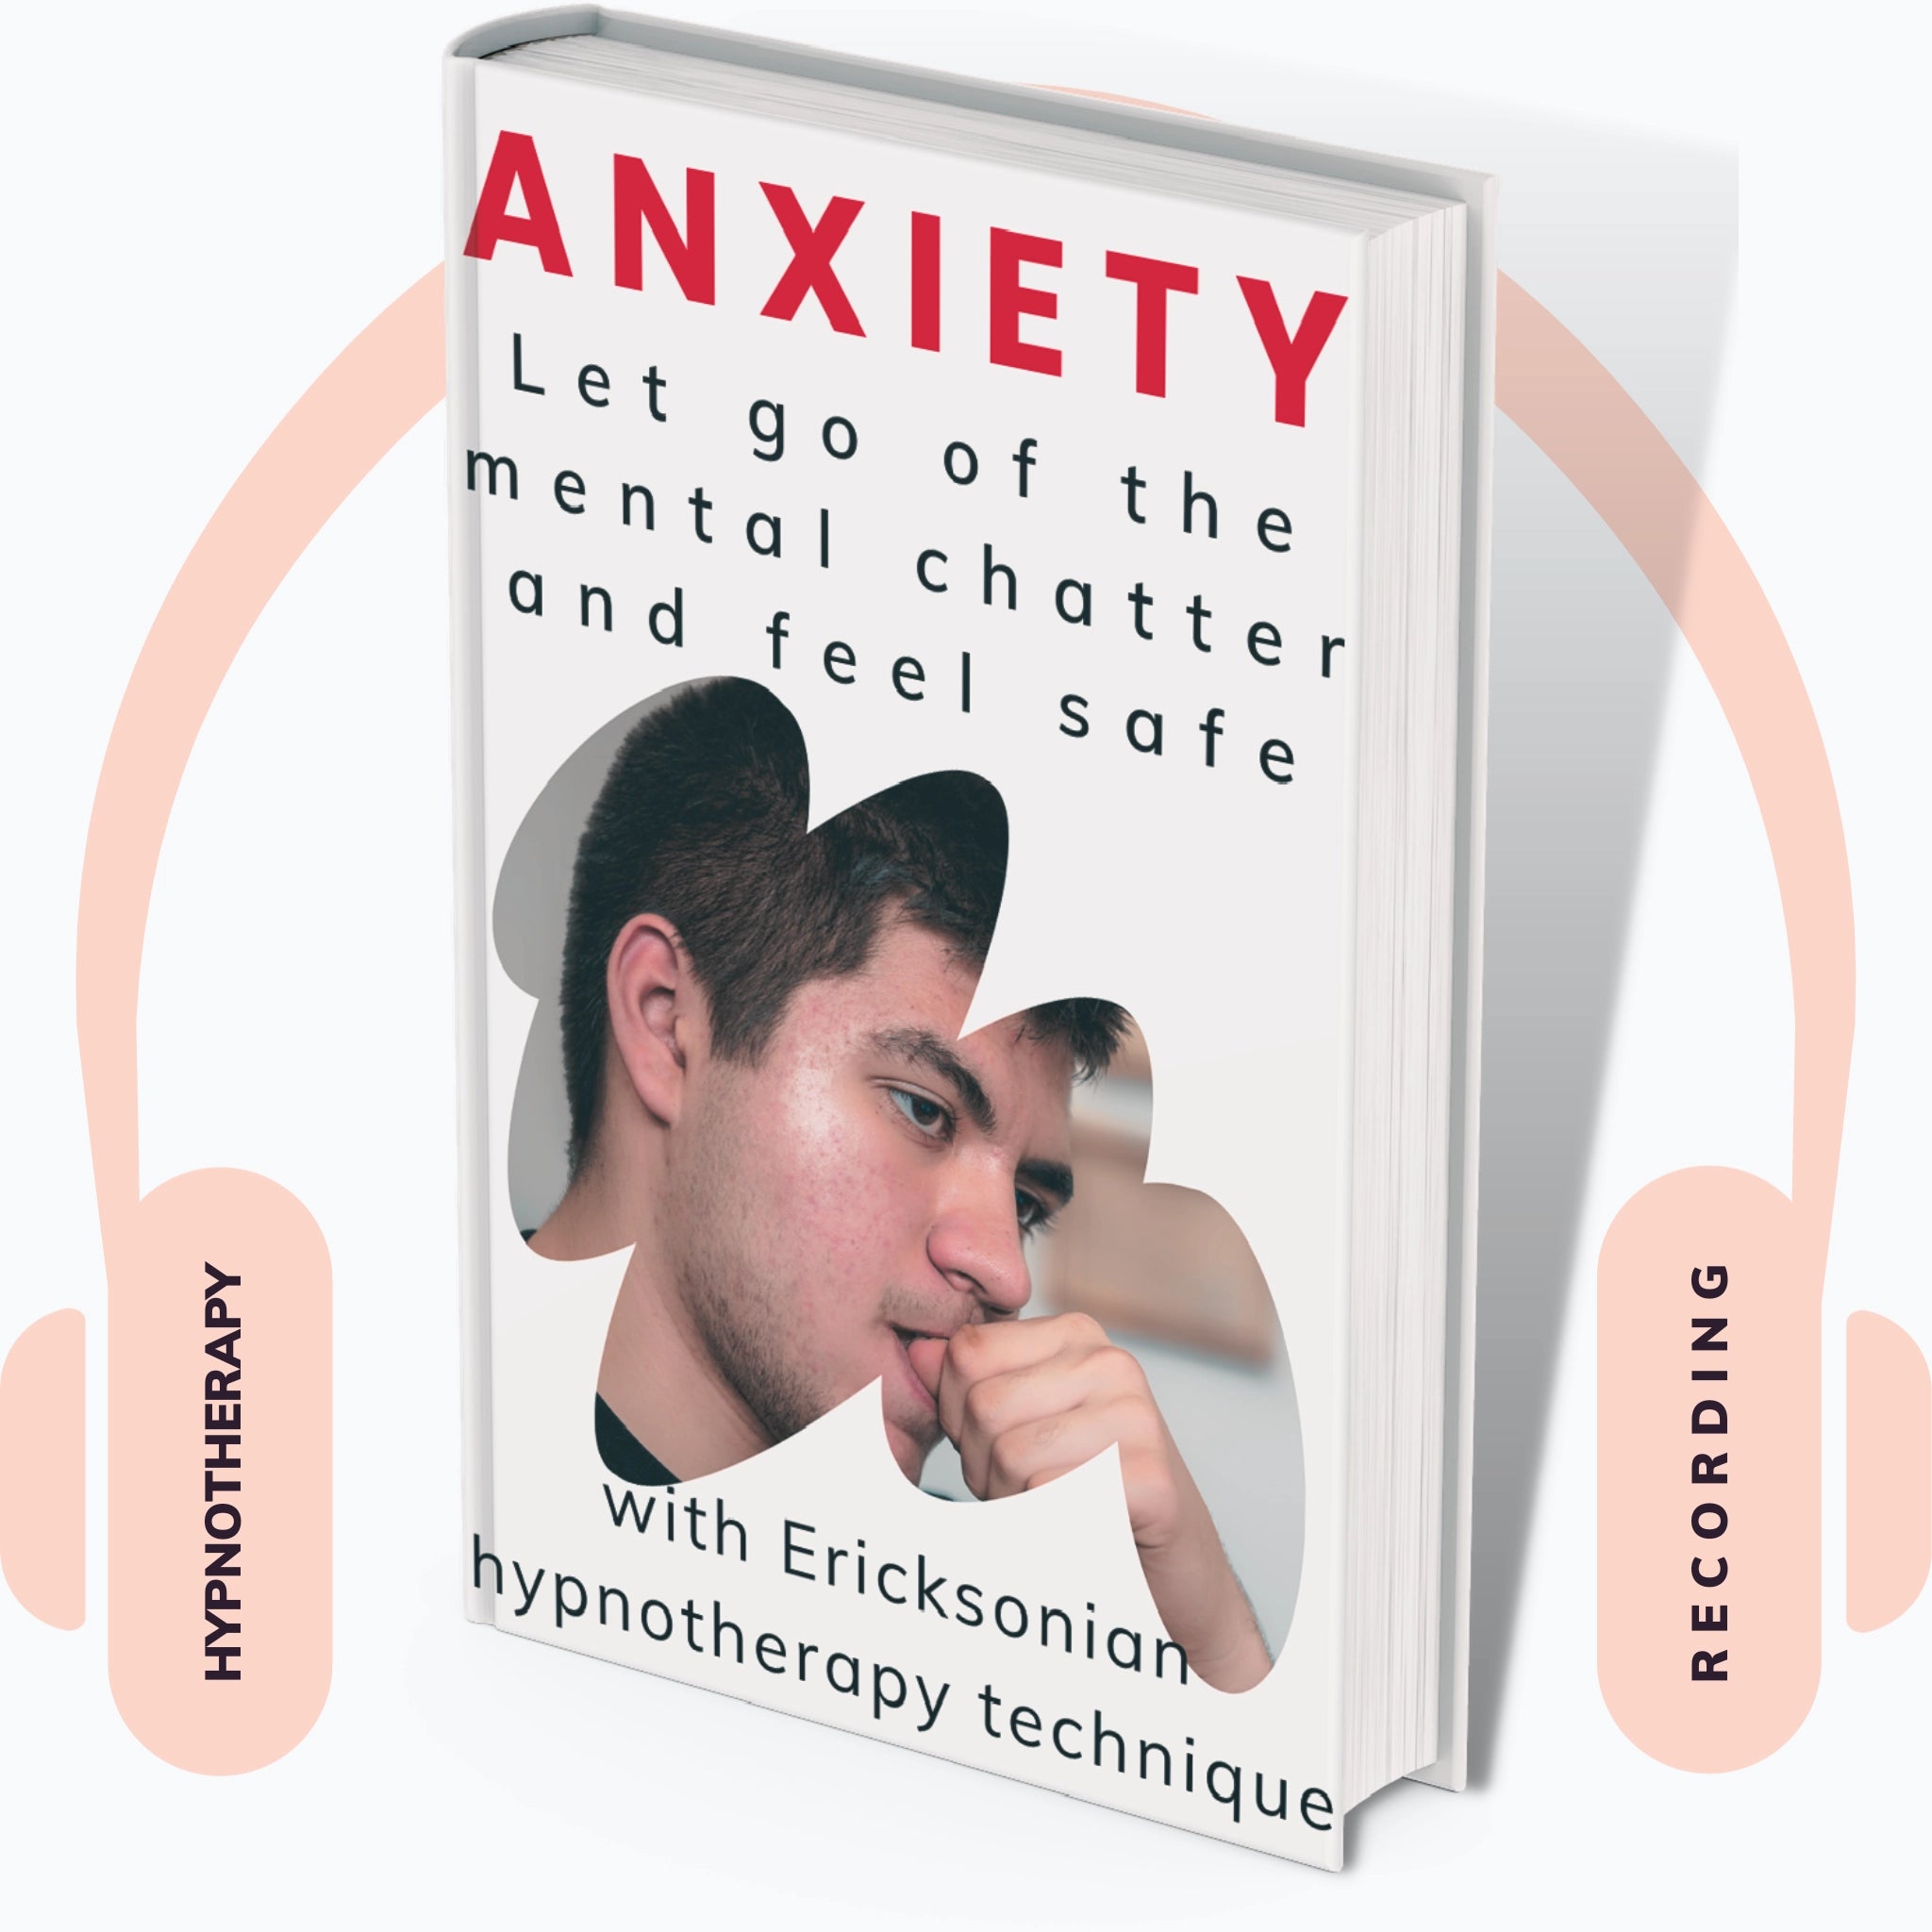 Audiobook cover: Anxiety, Let go of the mental chatter and feel safe, with Ericksonian hypnotherapy technique